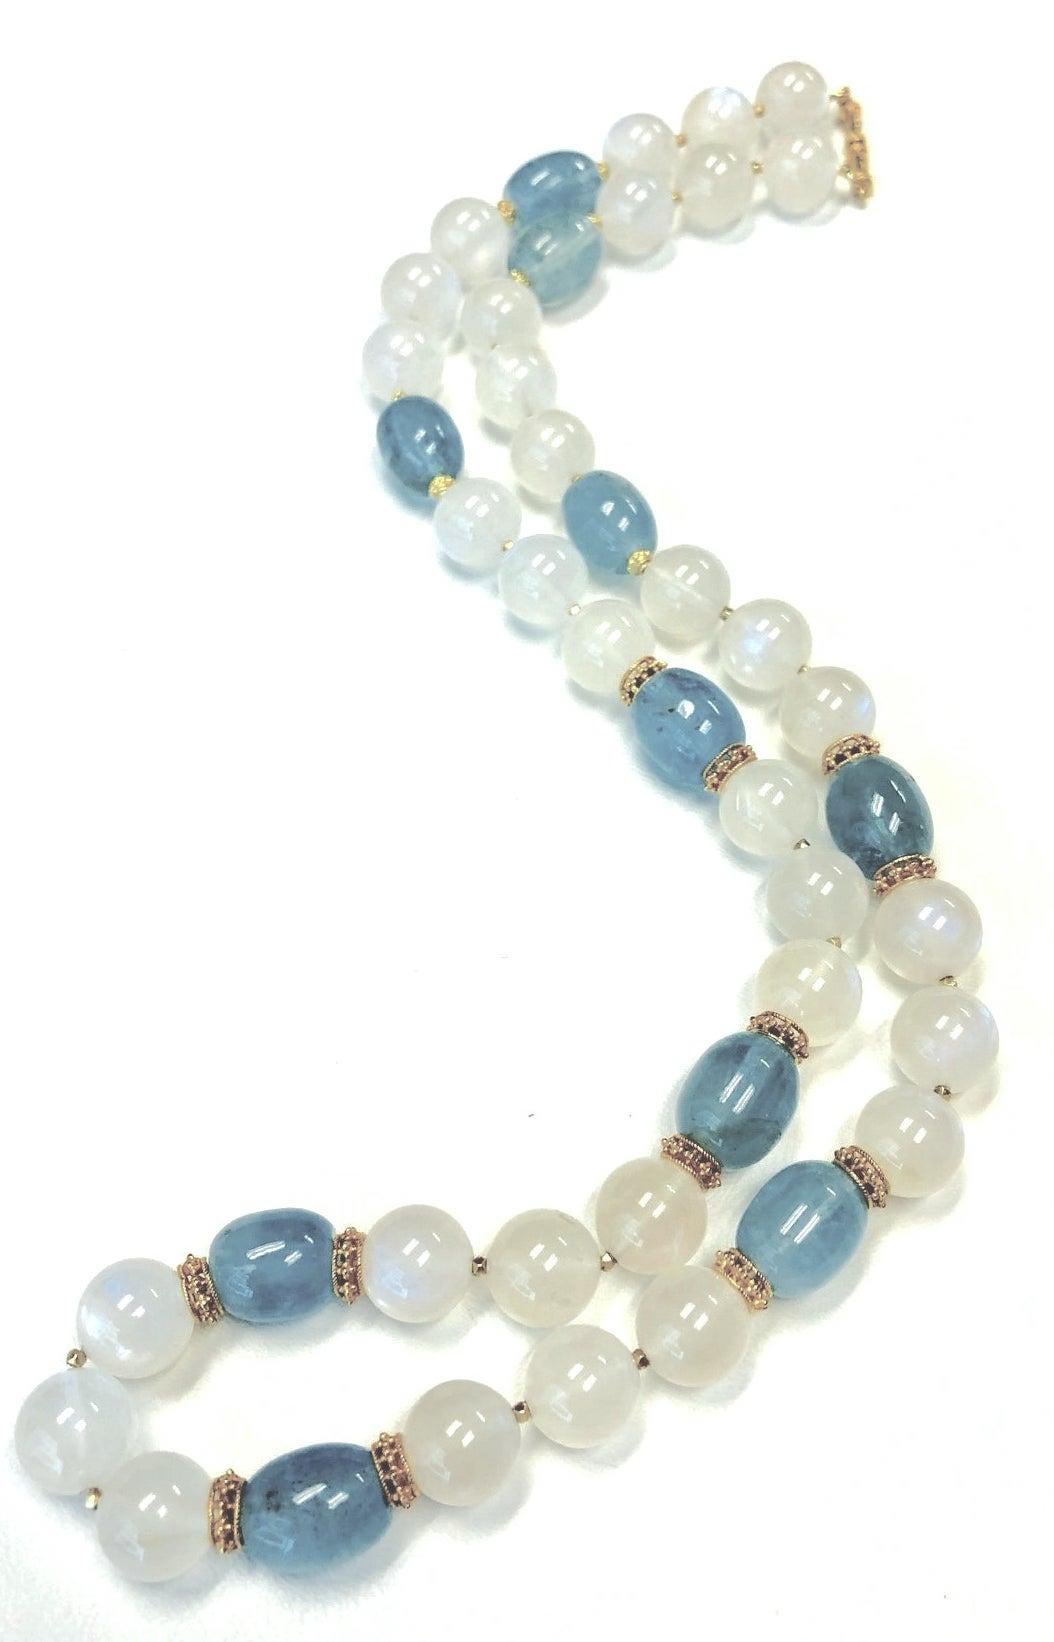 Artisan Moonstone Bead and Aquamarine Bead Necklace with Yellow Gold Spacers, 24 Inches